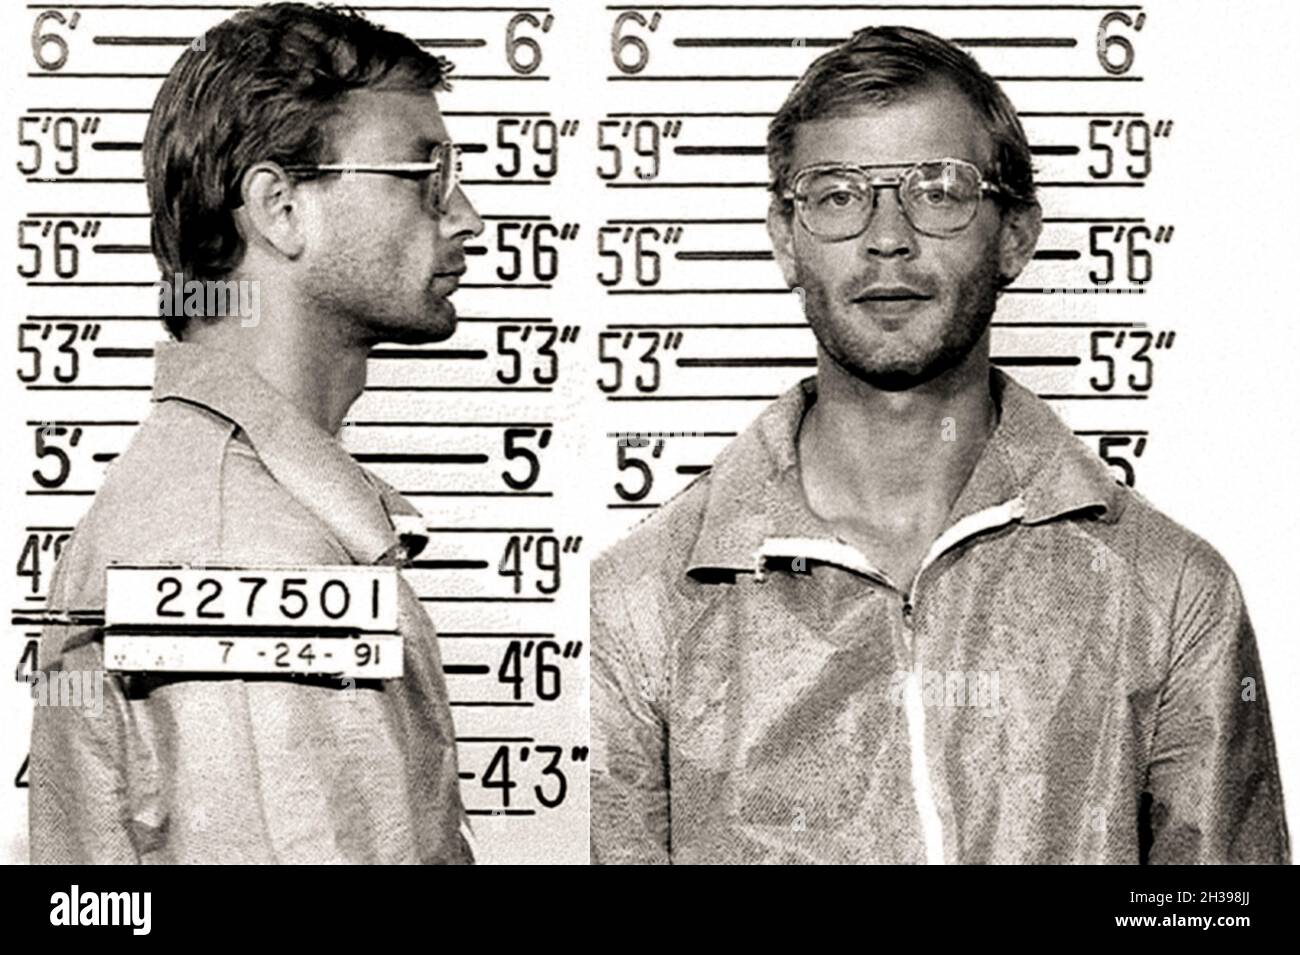 1991 , 24 july ,  Milwaukee , USA : JEFFREY DAHMER aka the MILWAUKEE CANNIBAL ( 1960 - 1994 ), was arrested  like serial-killer in a photobooth of Police Department  . Dahmer was an American spree killer who murdered at least 17 people , from 1978 to 1991 . Unknown photographer . -  photo booth - photo-booth - SERIAL KILLER - Mostro di Milwaukee - The Monster of - portrait - ritratto - serial-killer - assassino seriale - CRONACA NERA - criminale - criminal - SERIAL KILLER  - GAY - LGBT - CANNIBALE - cannibalismo - omosessuale - omosessualità - homosexuality - homosexual - foto segnaletica dell Stock Photo